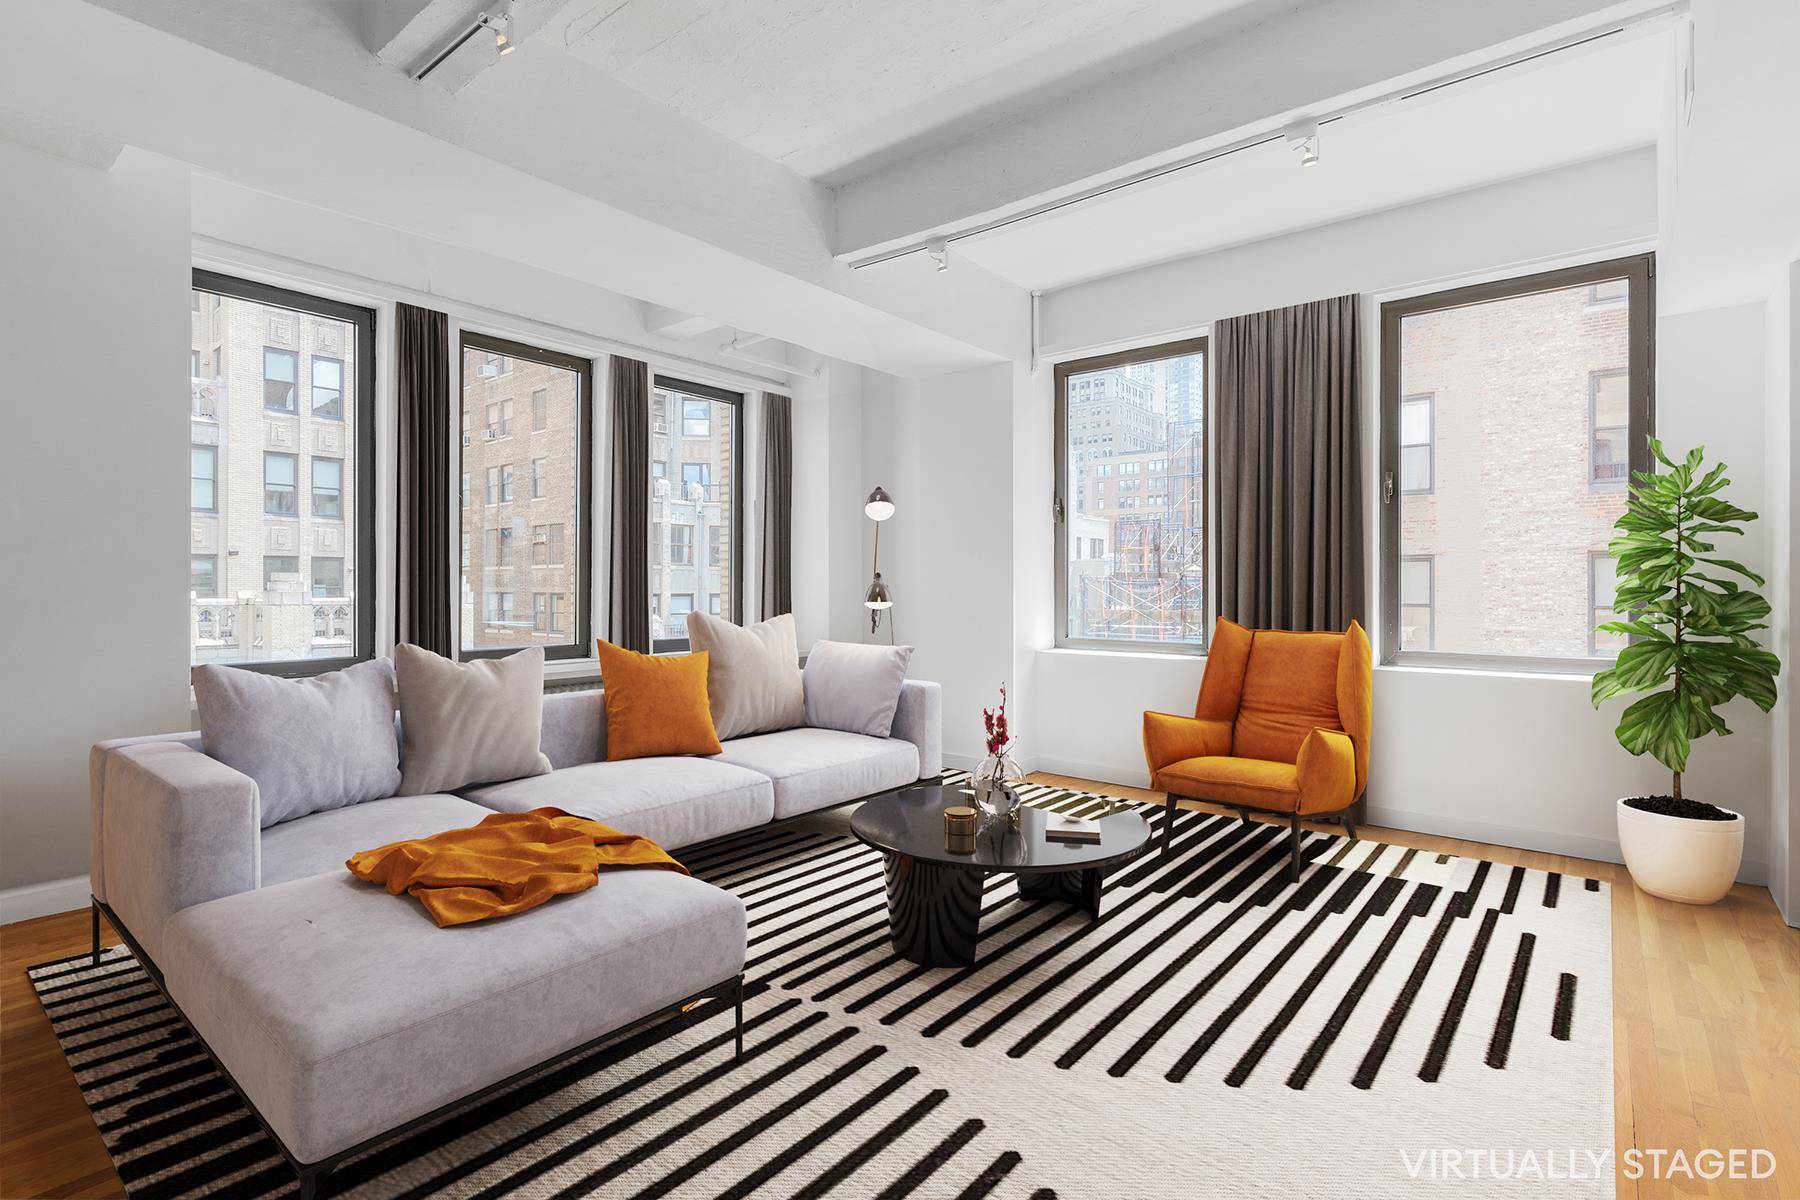 PRICE REDUCED ! This sleek, contemporary 1, 000 square foot LIVE WORK CONDO LOFT is a perfect offering for creative types looking for an urban sanctuary, featuring large sunny windows, ...